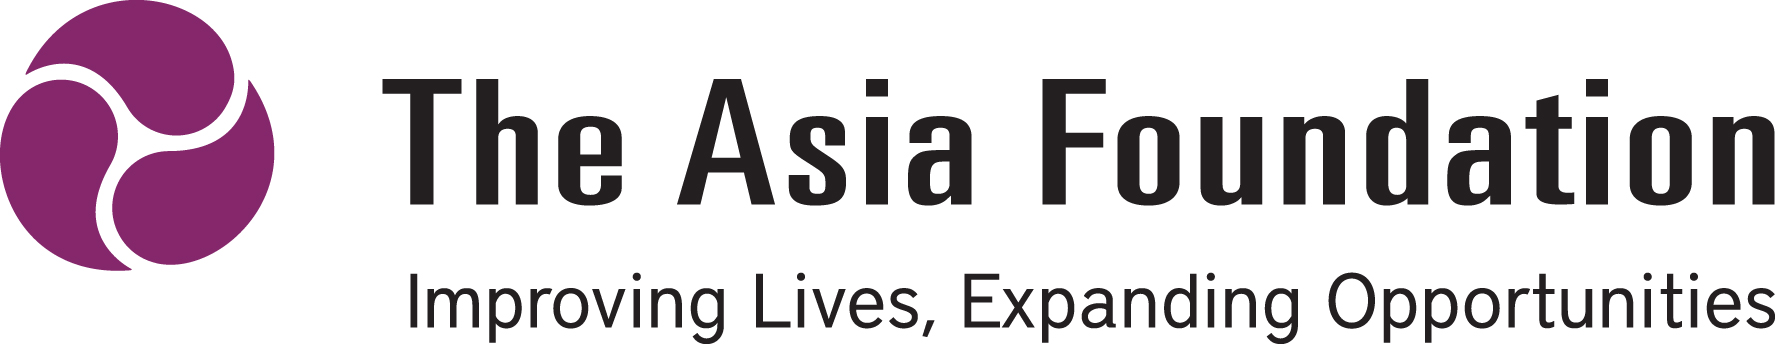 The_Asia_Foundation